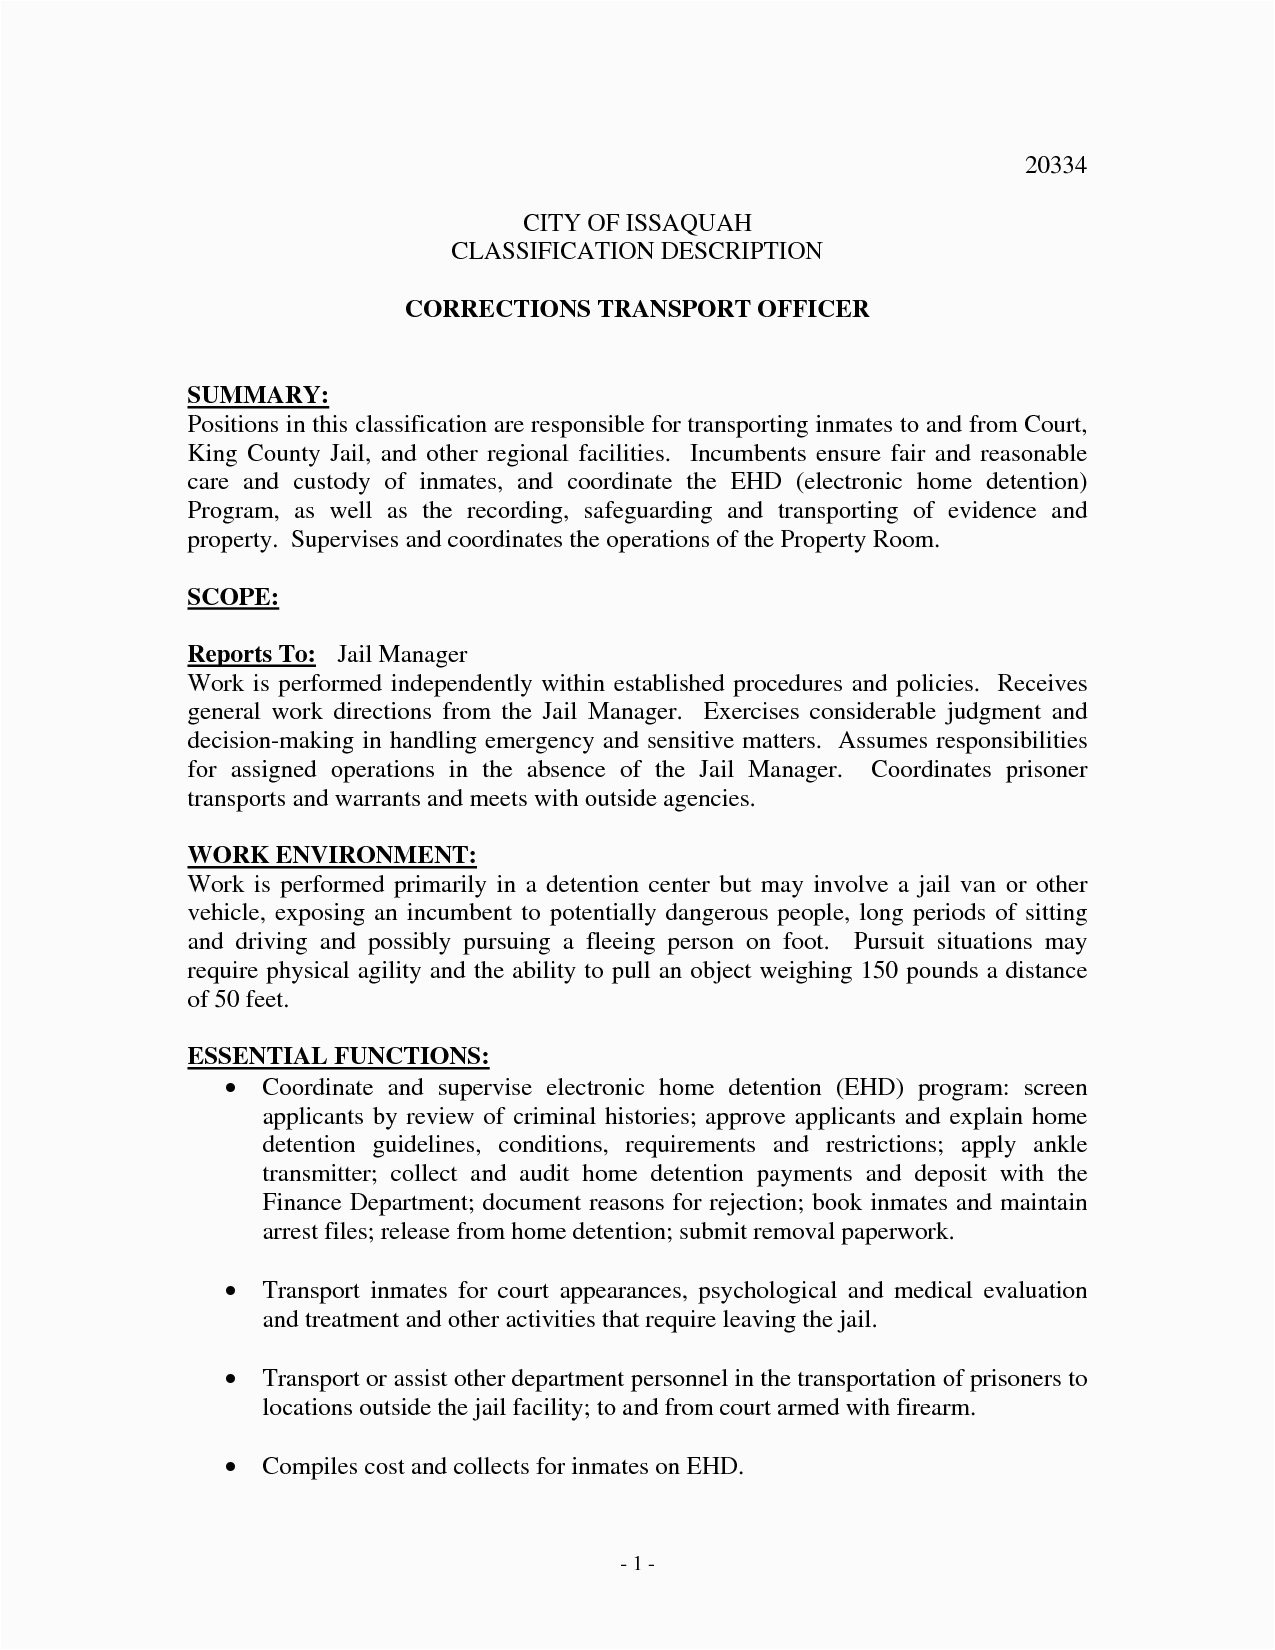 Sample Resume for Correctional Officer with No Experience Correctional Ficer Resume No Experience